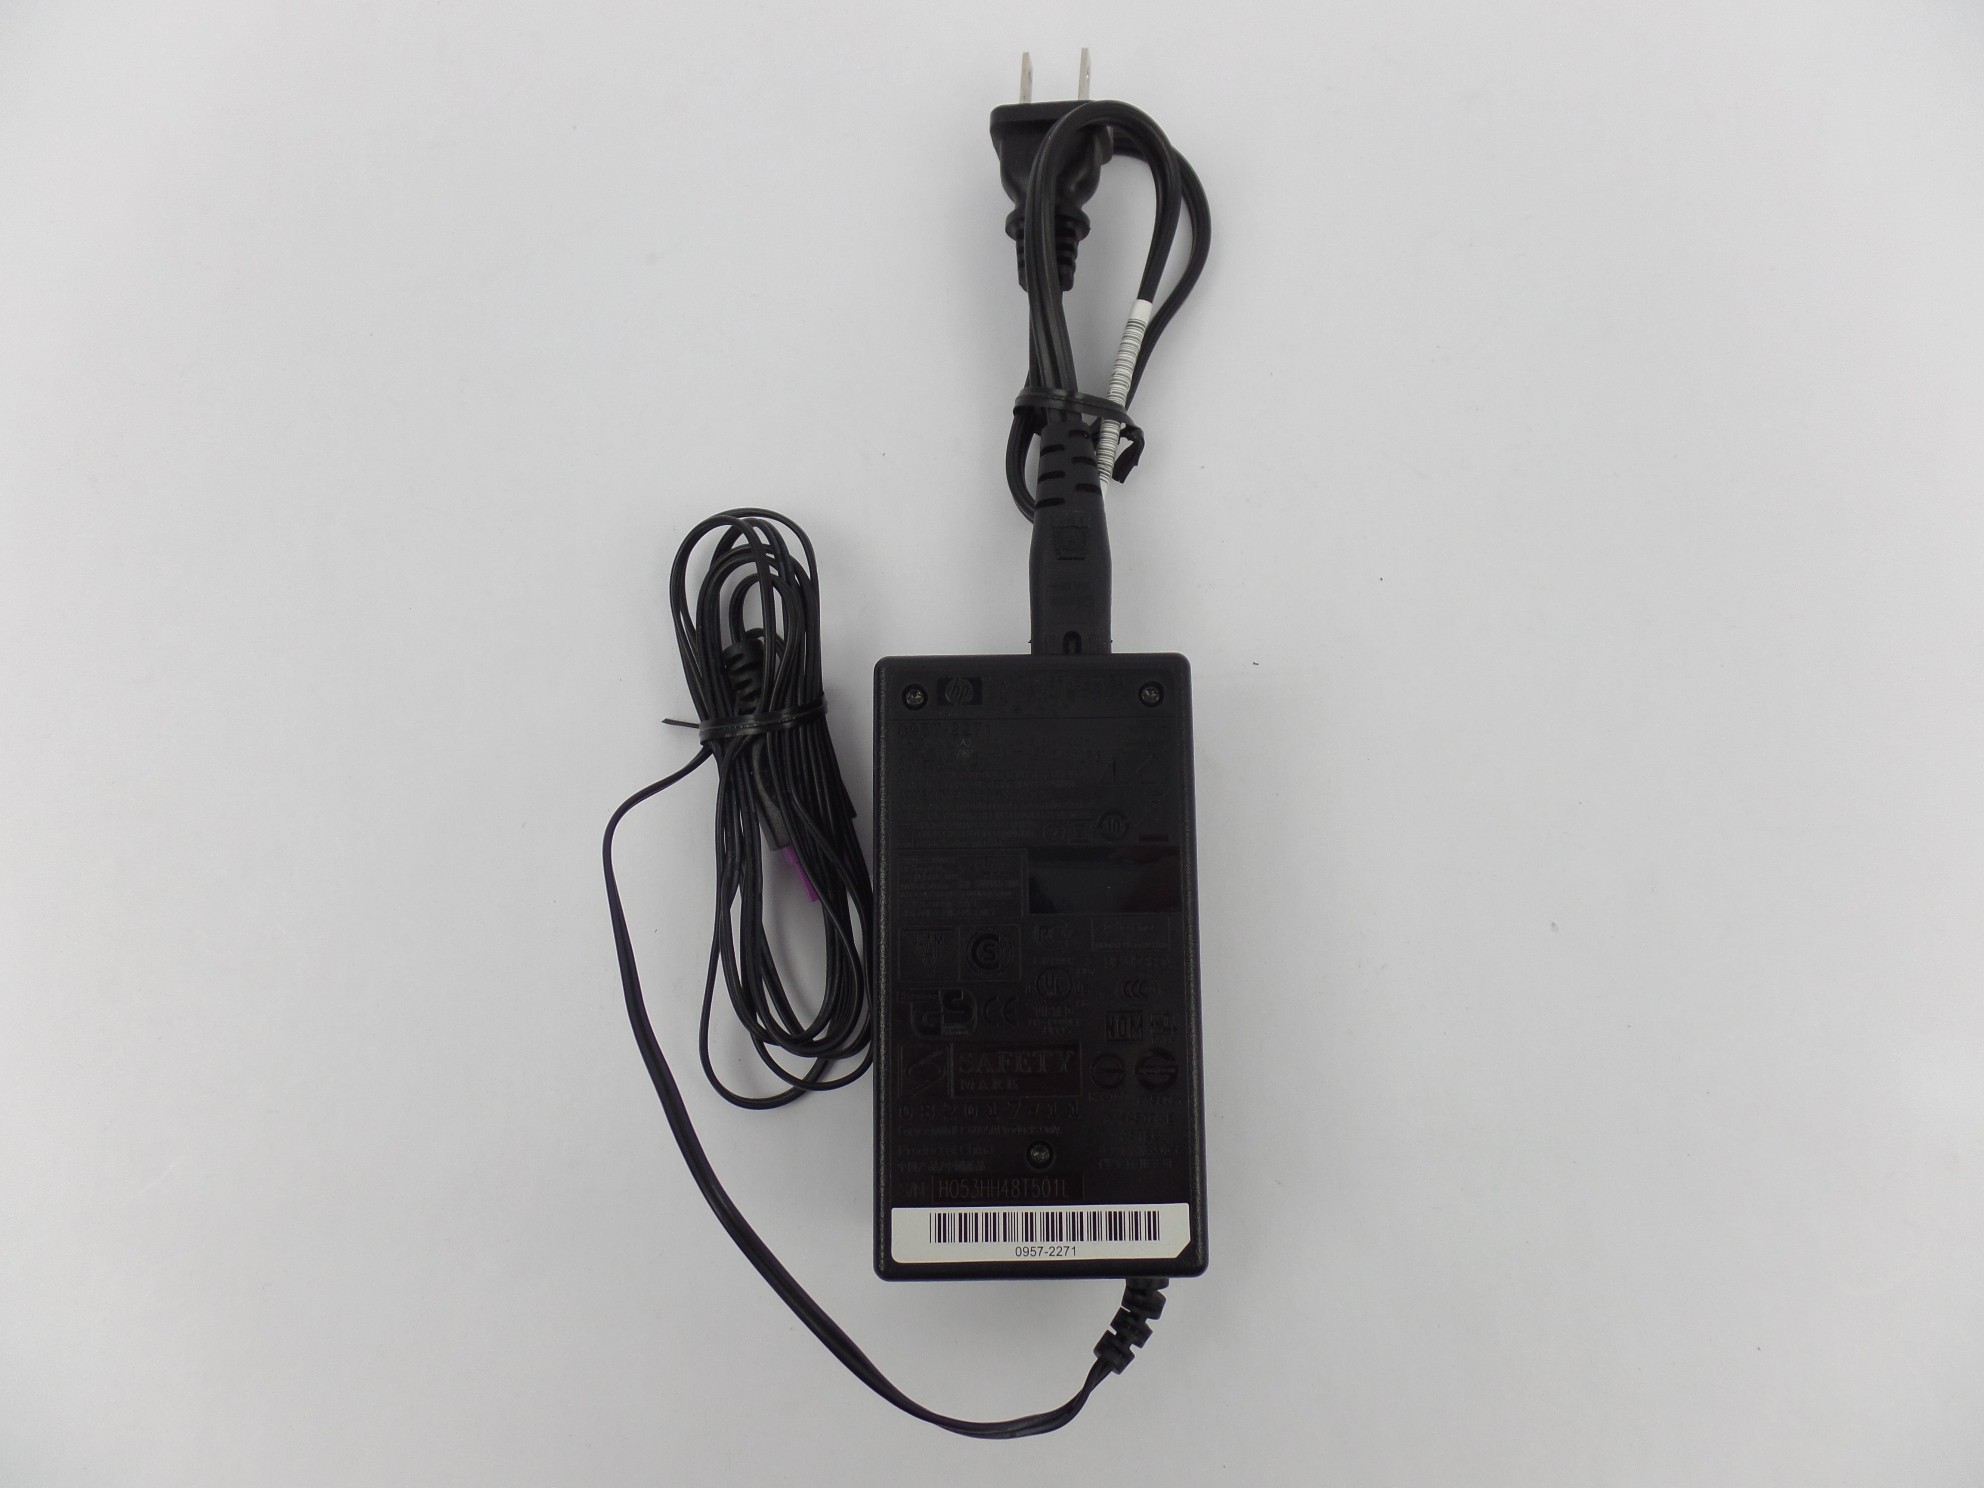 OEM Genuine HP AC Power Supply Adapter 0957-2271 For HP OfficeJet 4500 6000